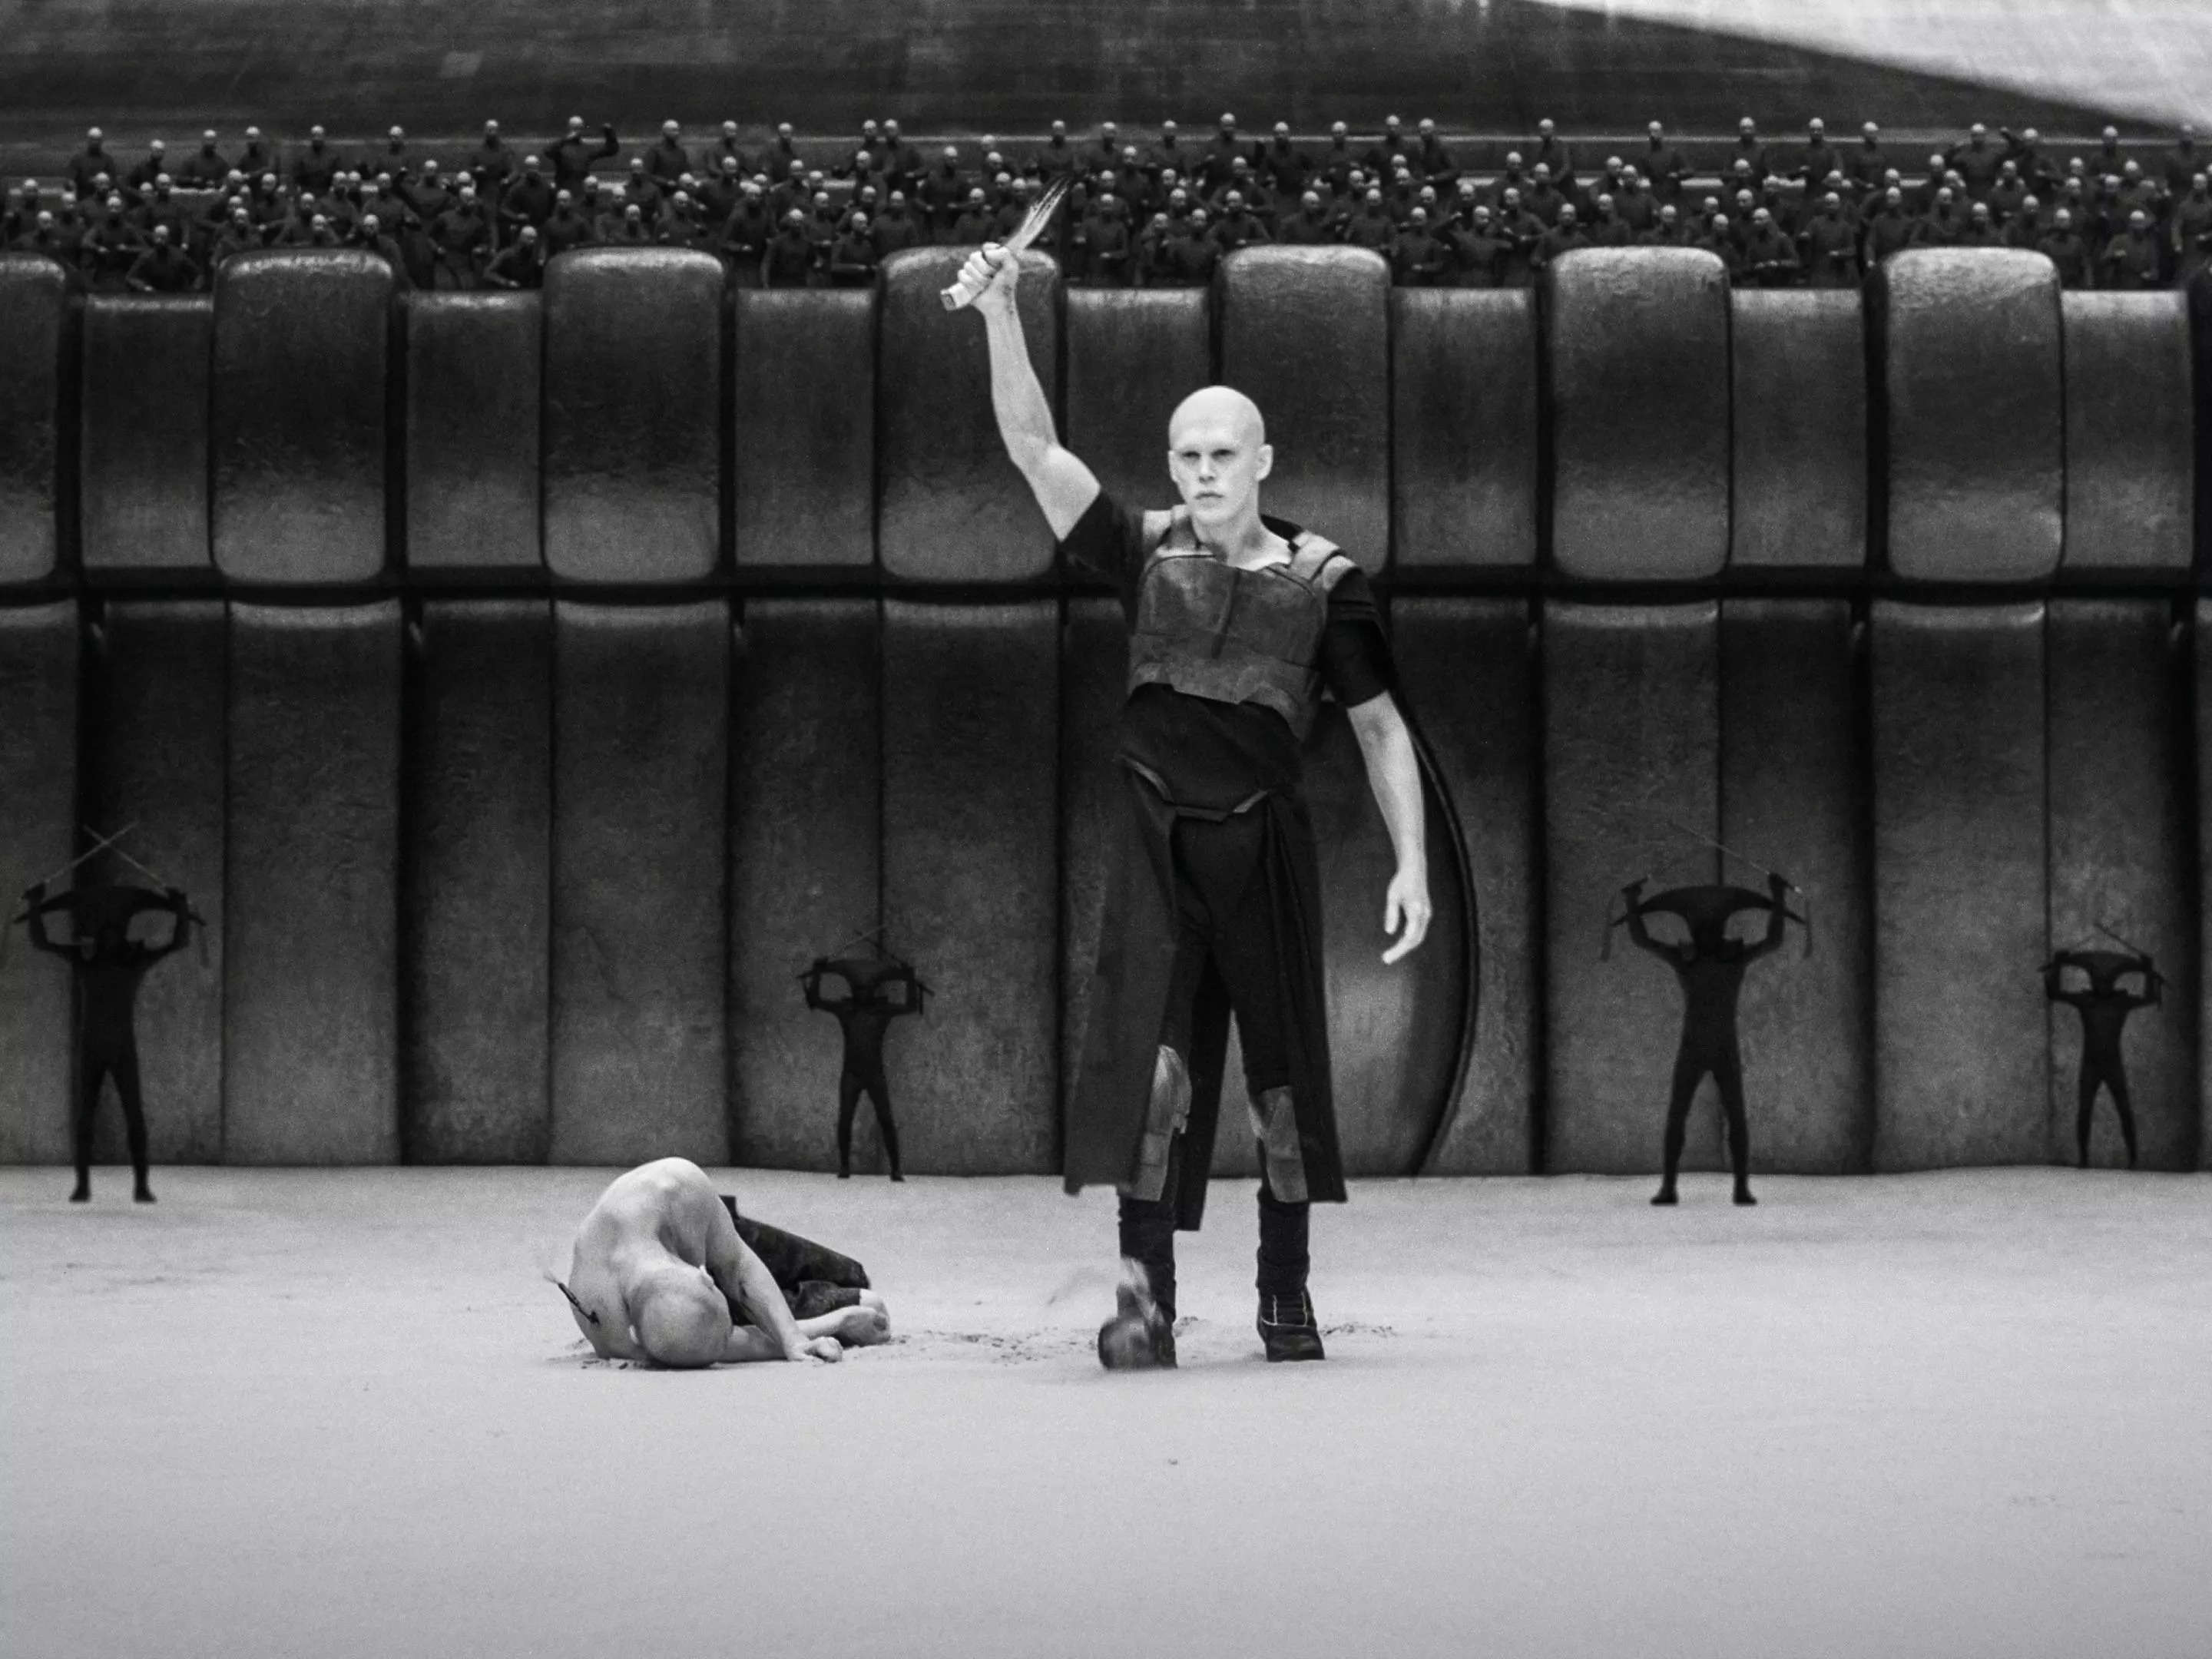 austin butler as feyd-rautha in an area, holding up a bloody knife while a man lies in the sand at his feet. the scenery, including the walls and crowd, are all in black and white